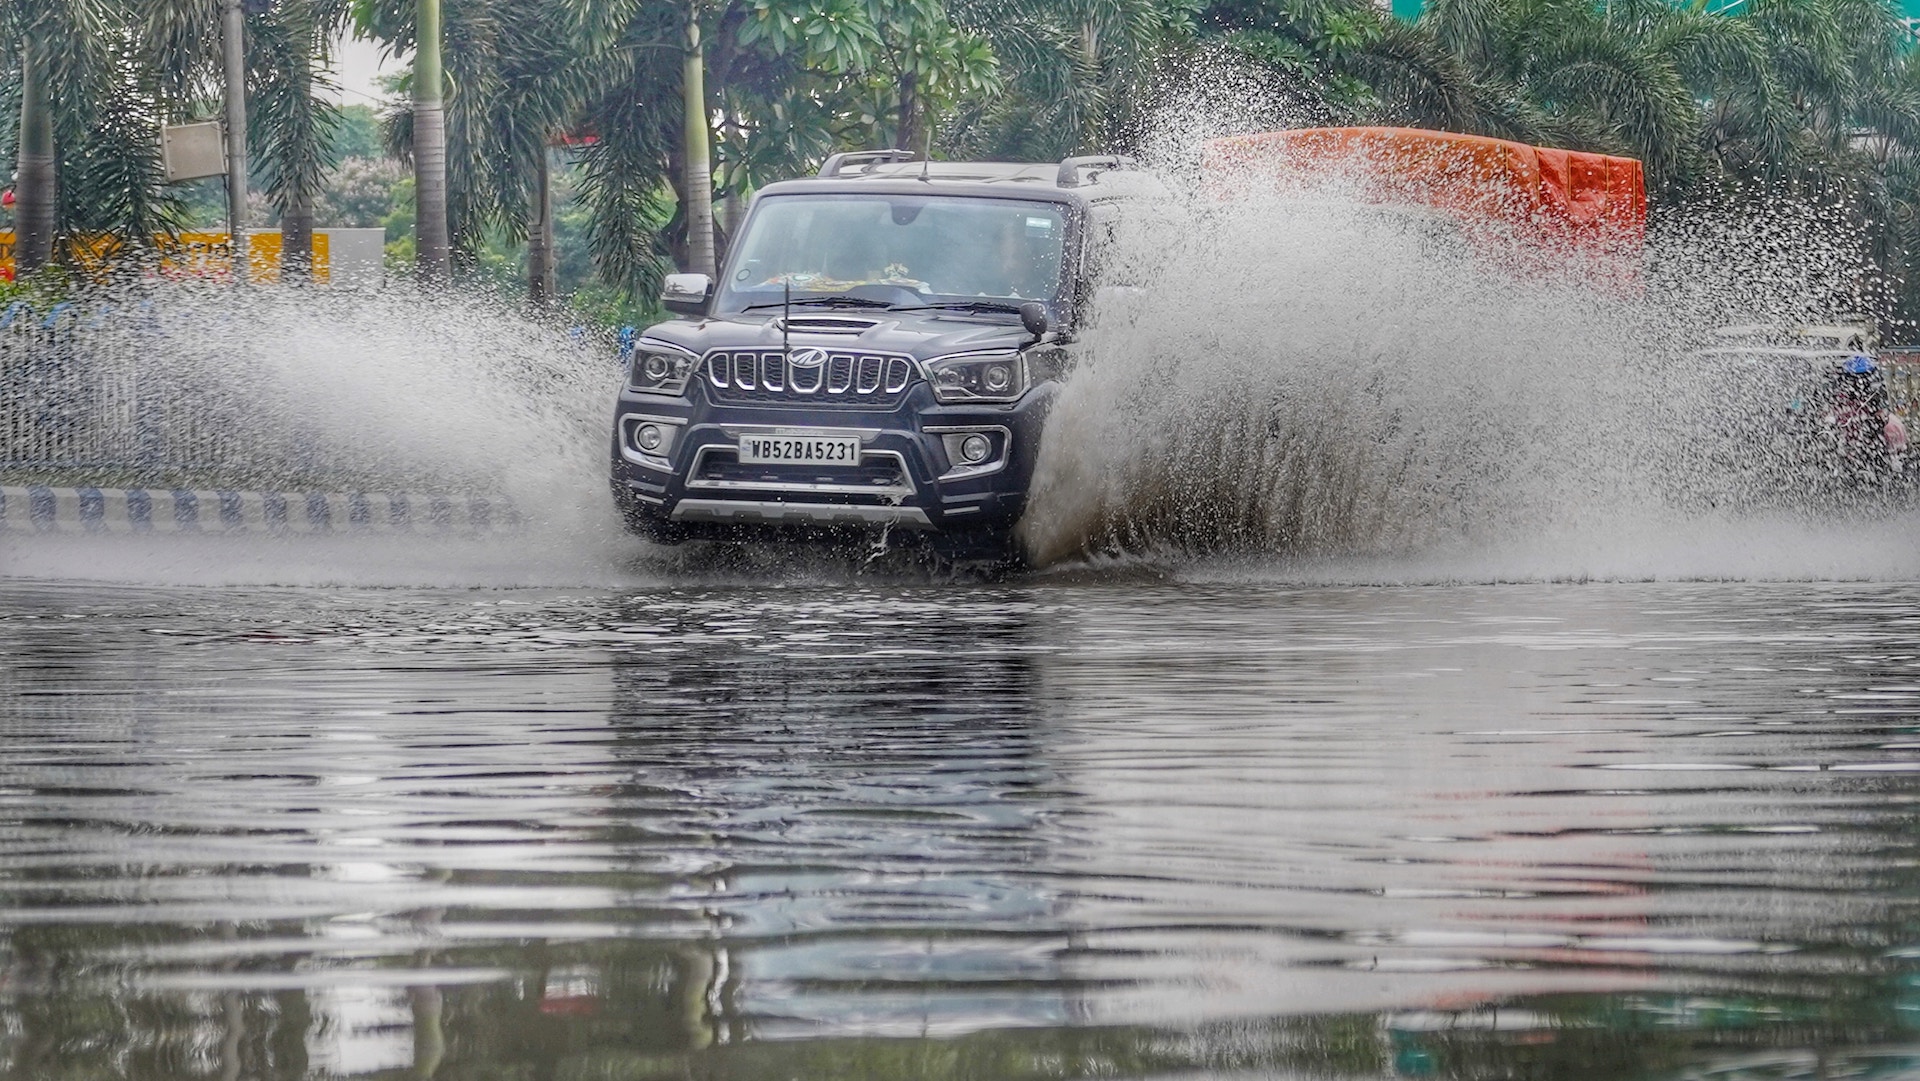 A jeep driving through a flood, induced by climate change